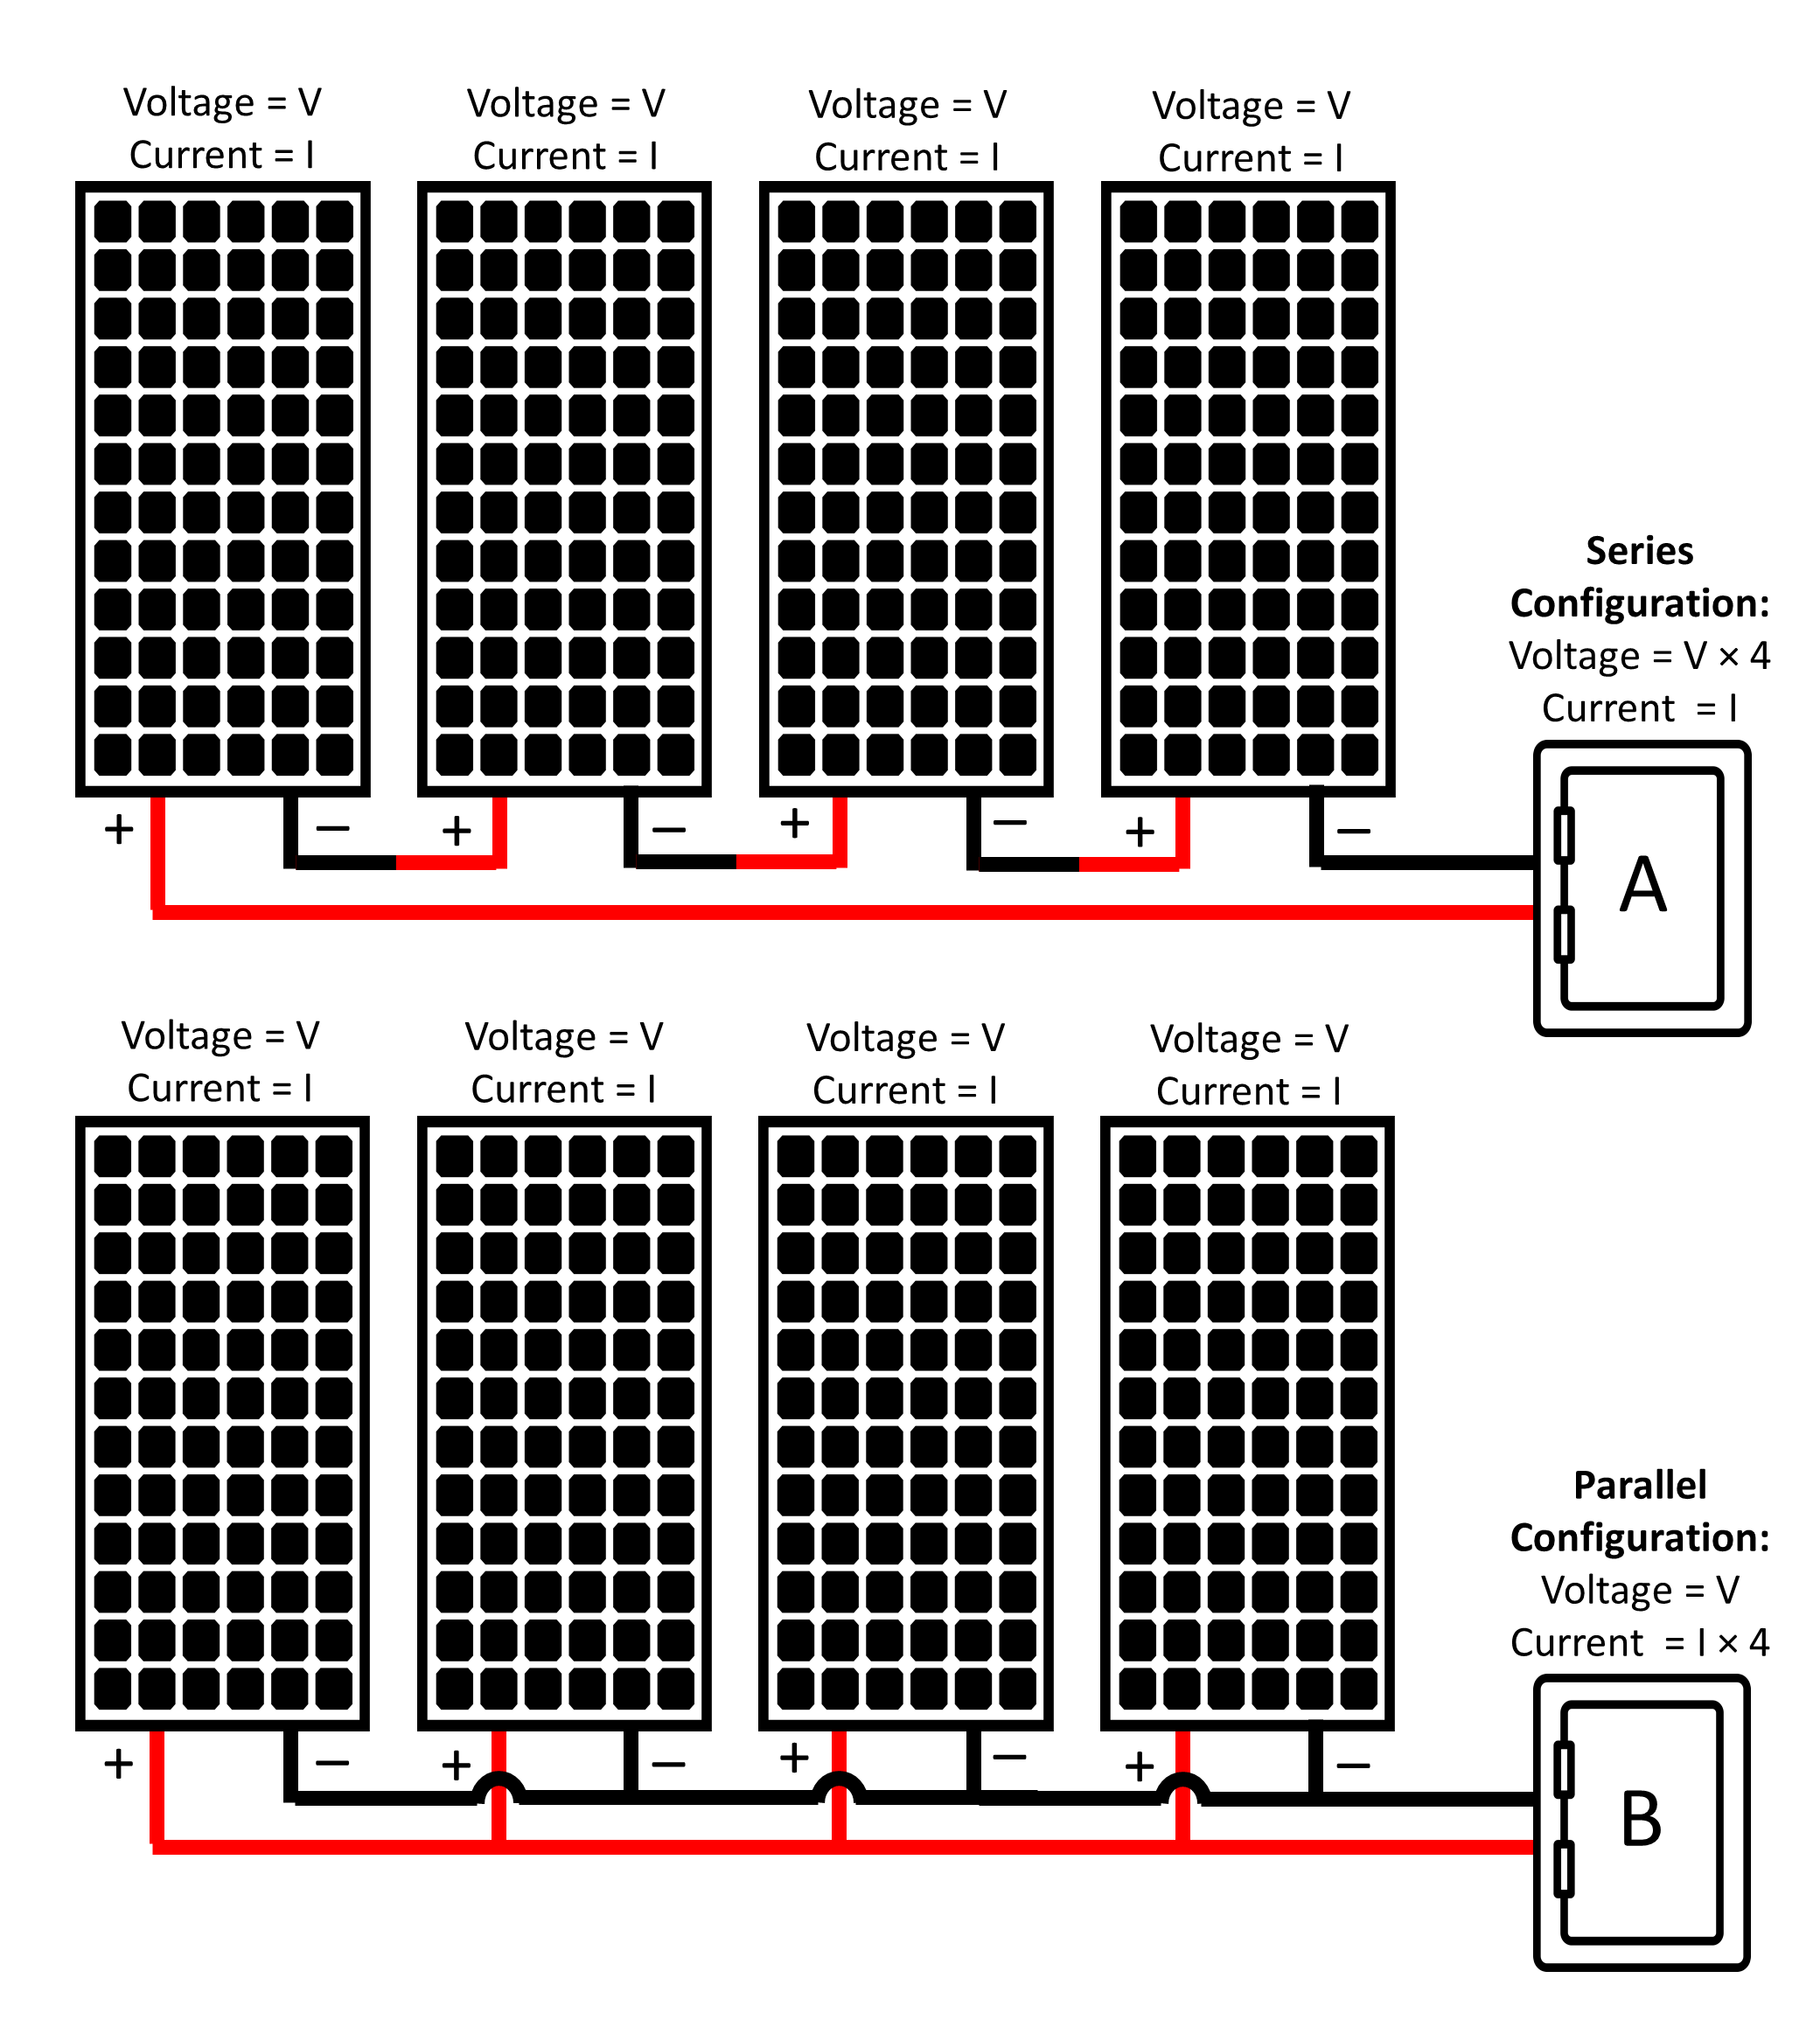 In a series circuit, the current through each of the components is the same while the voltage across the circuit is the sum of the voltages across each component (top); and in a parallel circuit, the voltage across each of the components is the same while the total current is the sum of the currents through each component (bottom).